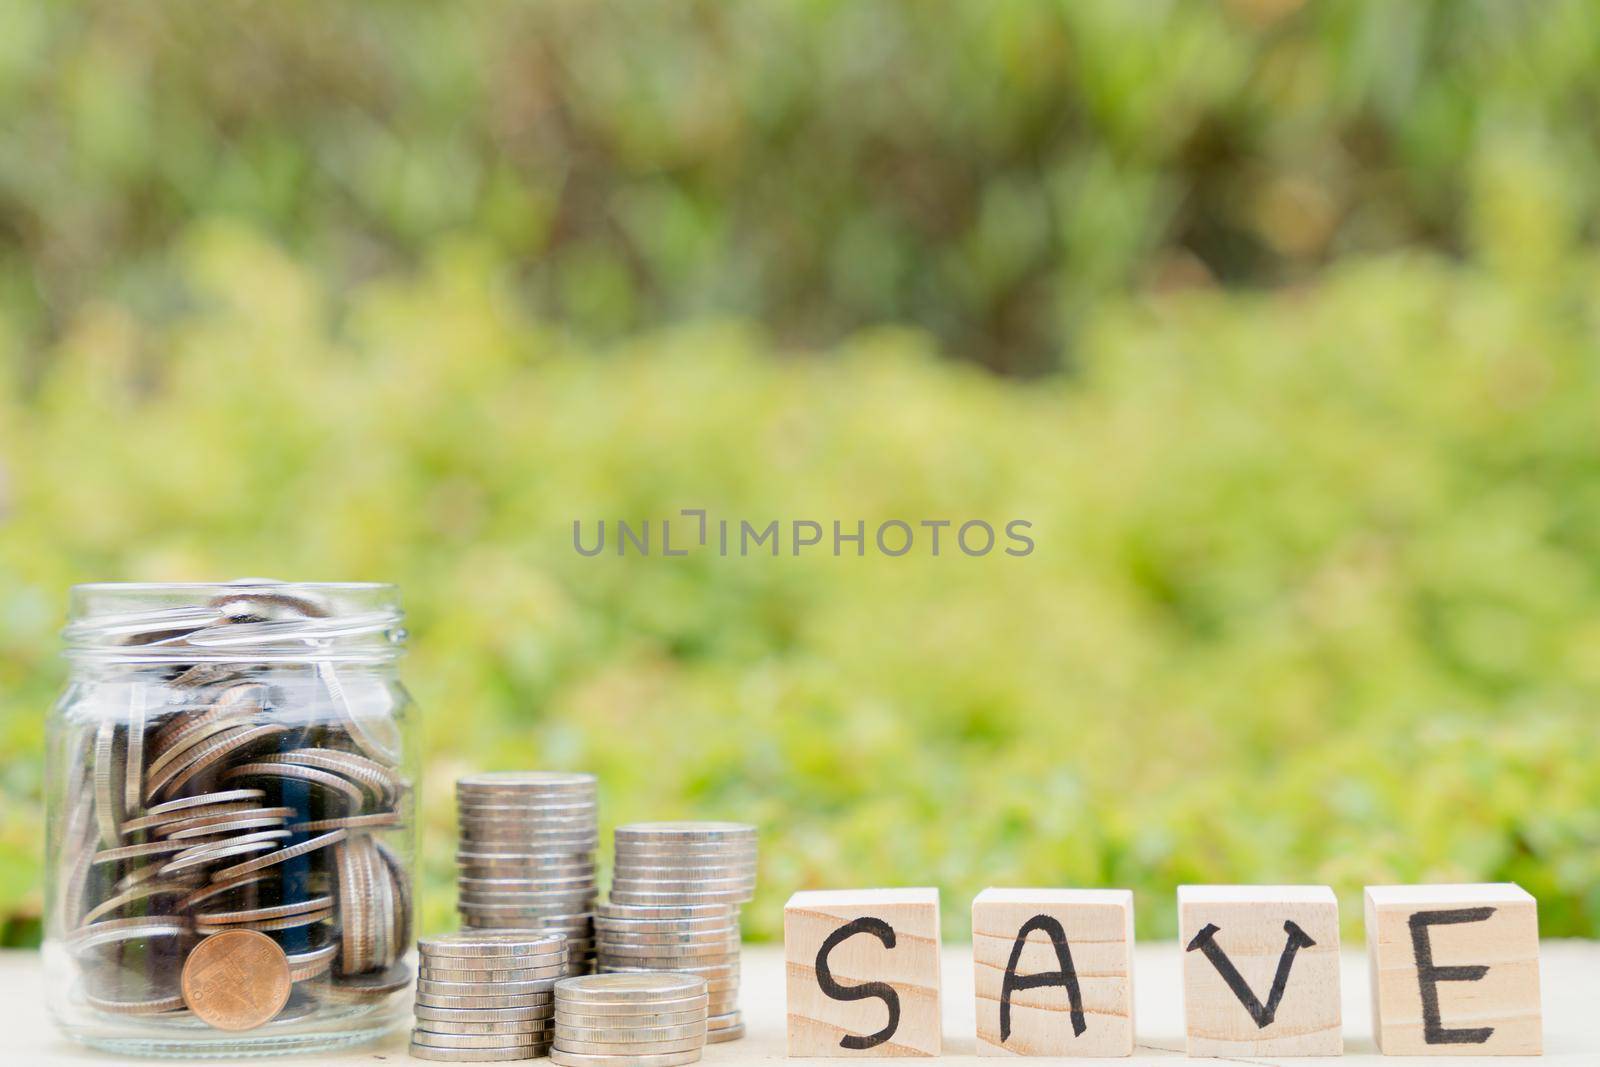 Save word on wooden block and jar full of coins on blurred green natural background. Saving money and investment concept.